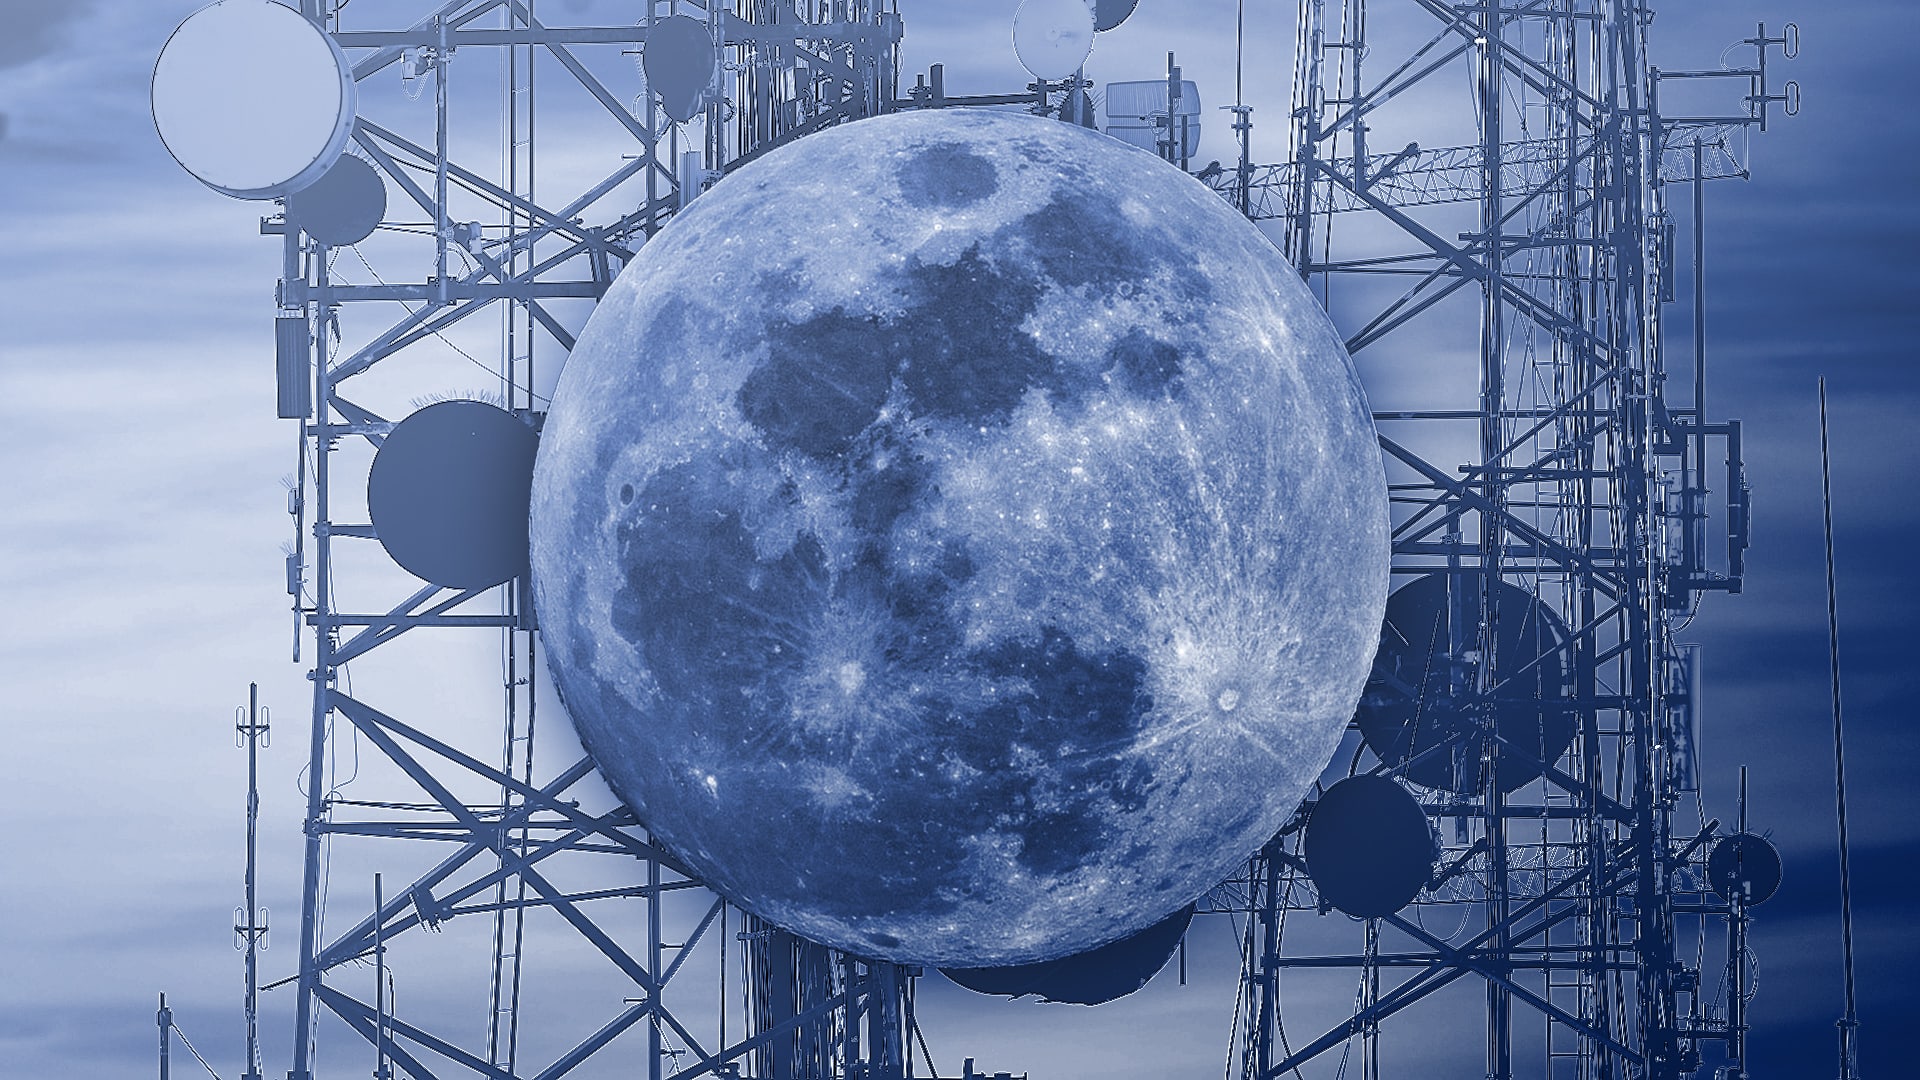 Why Nokia wants to put an LTE network on the moon